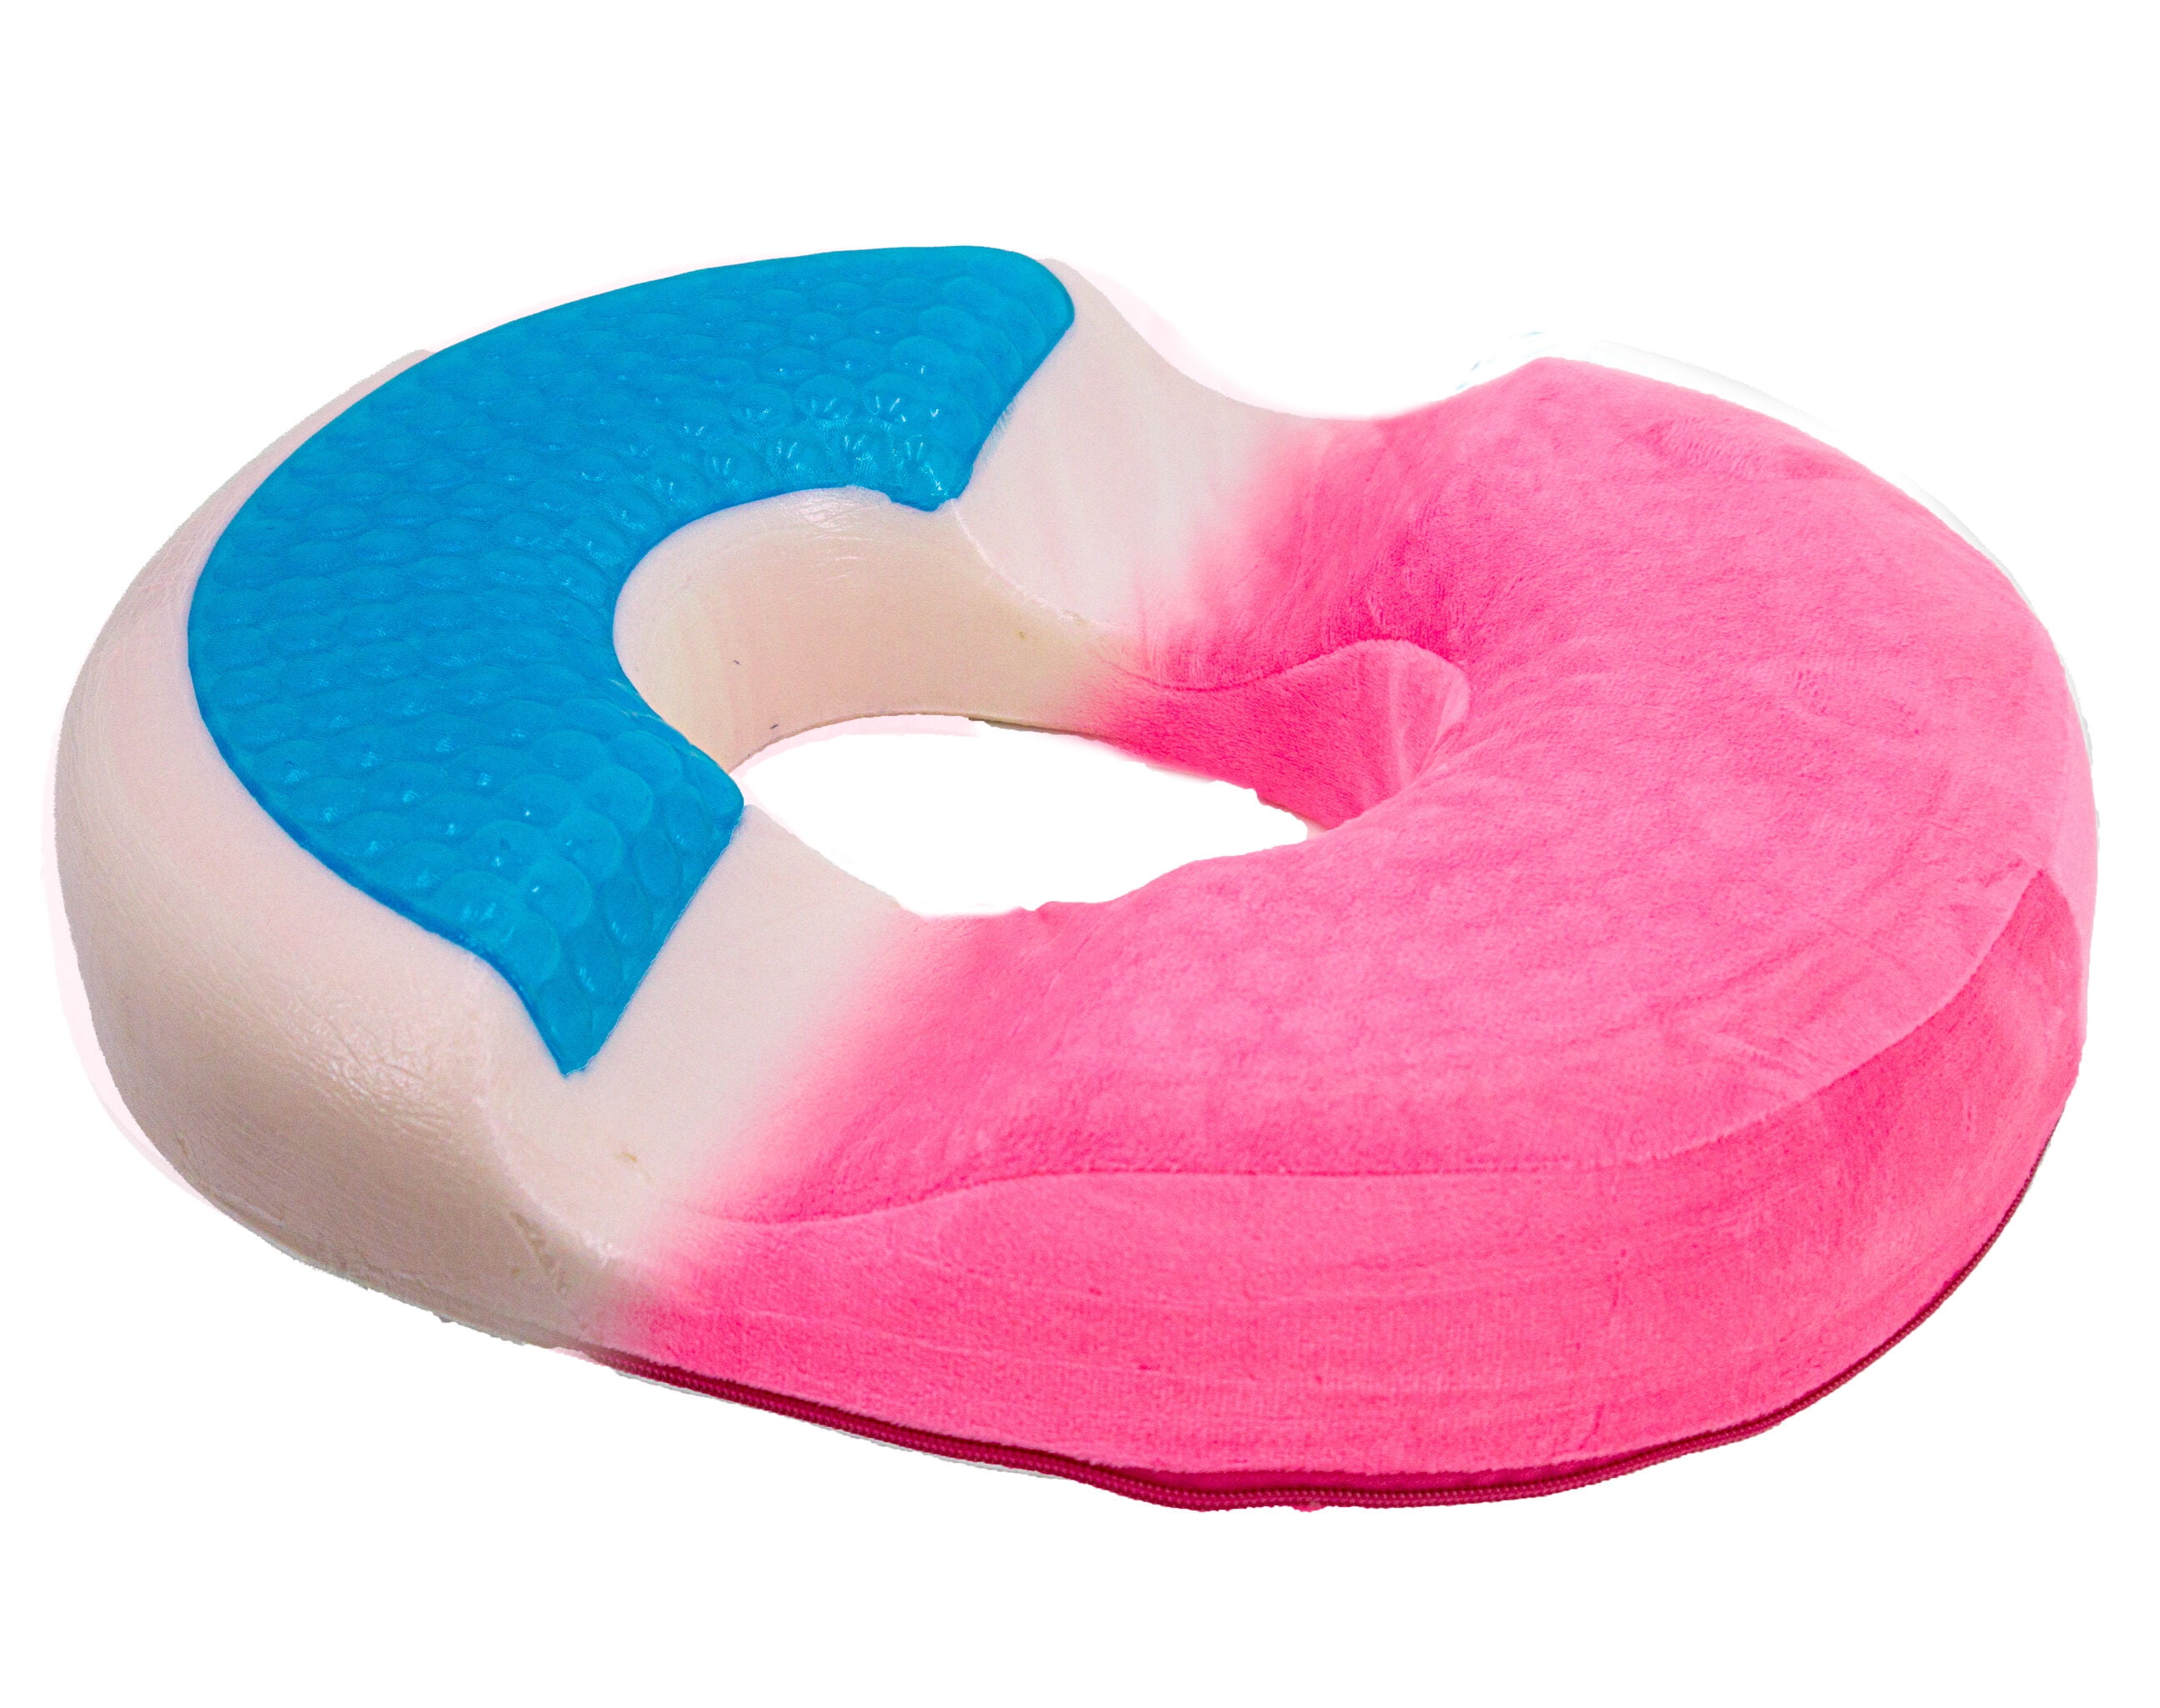 Orthopedic Donut Seat Gel Cushion w/ Infused Memory Foam & Cooling Gel for  Tailbone, Hemorrhoid, Sciatica & Prostate, Tailbone Pain Relief - Coccyx